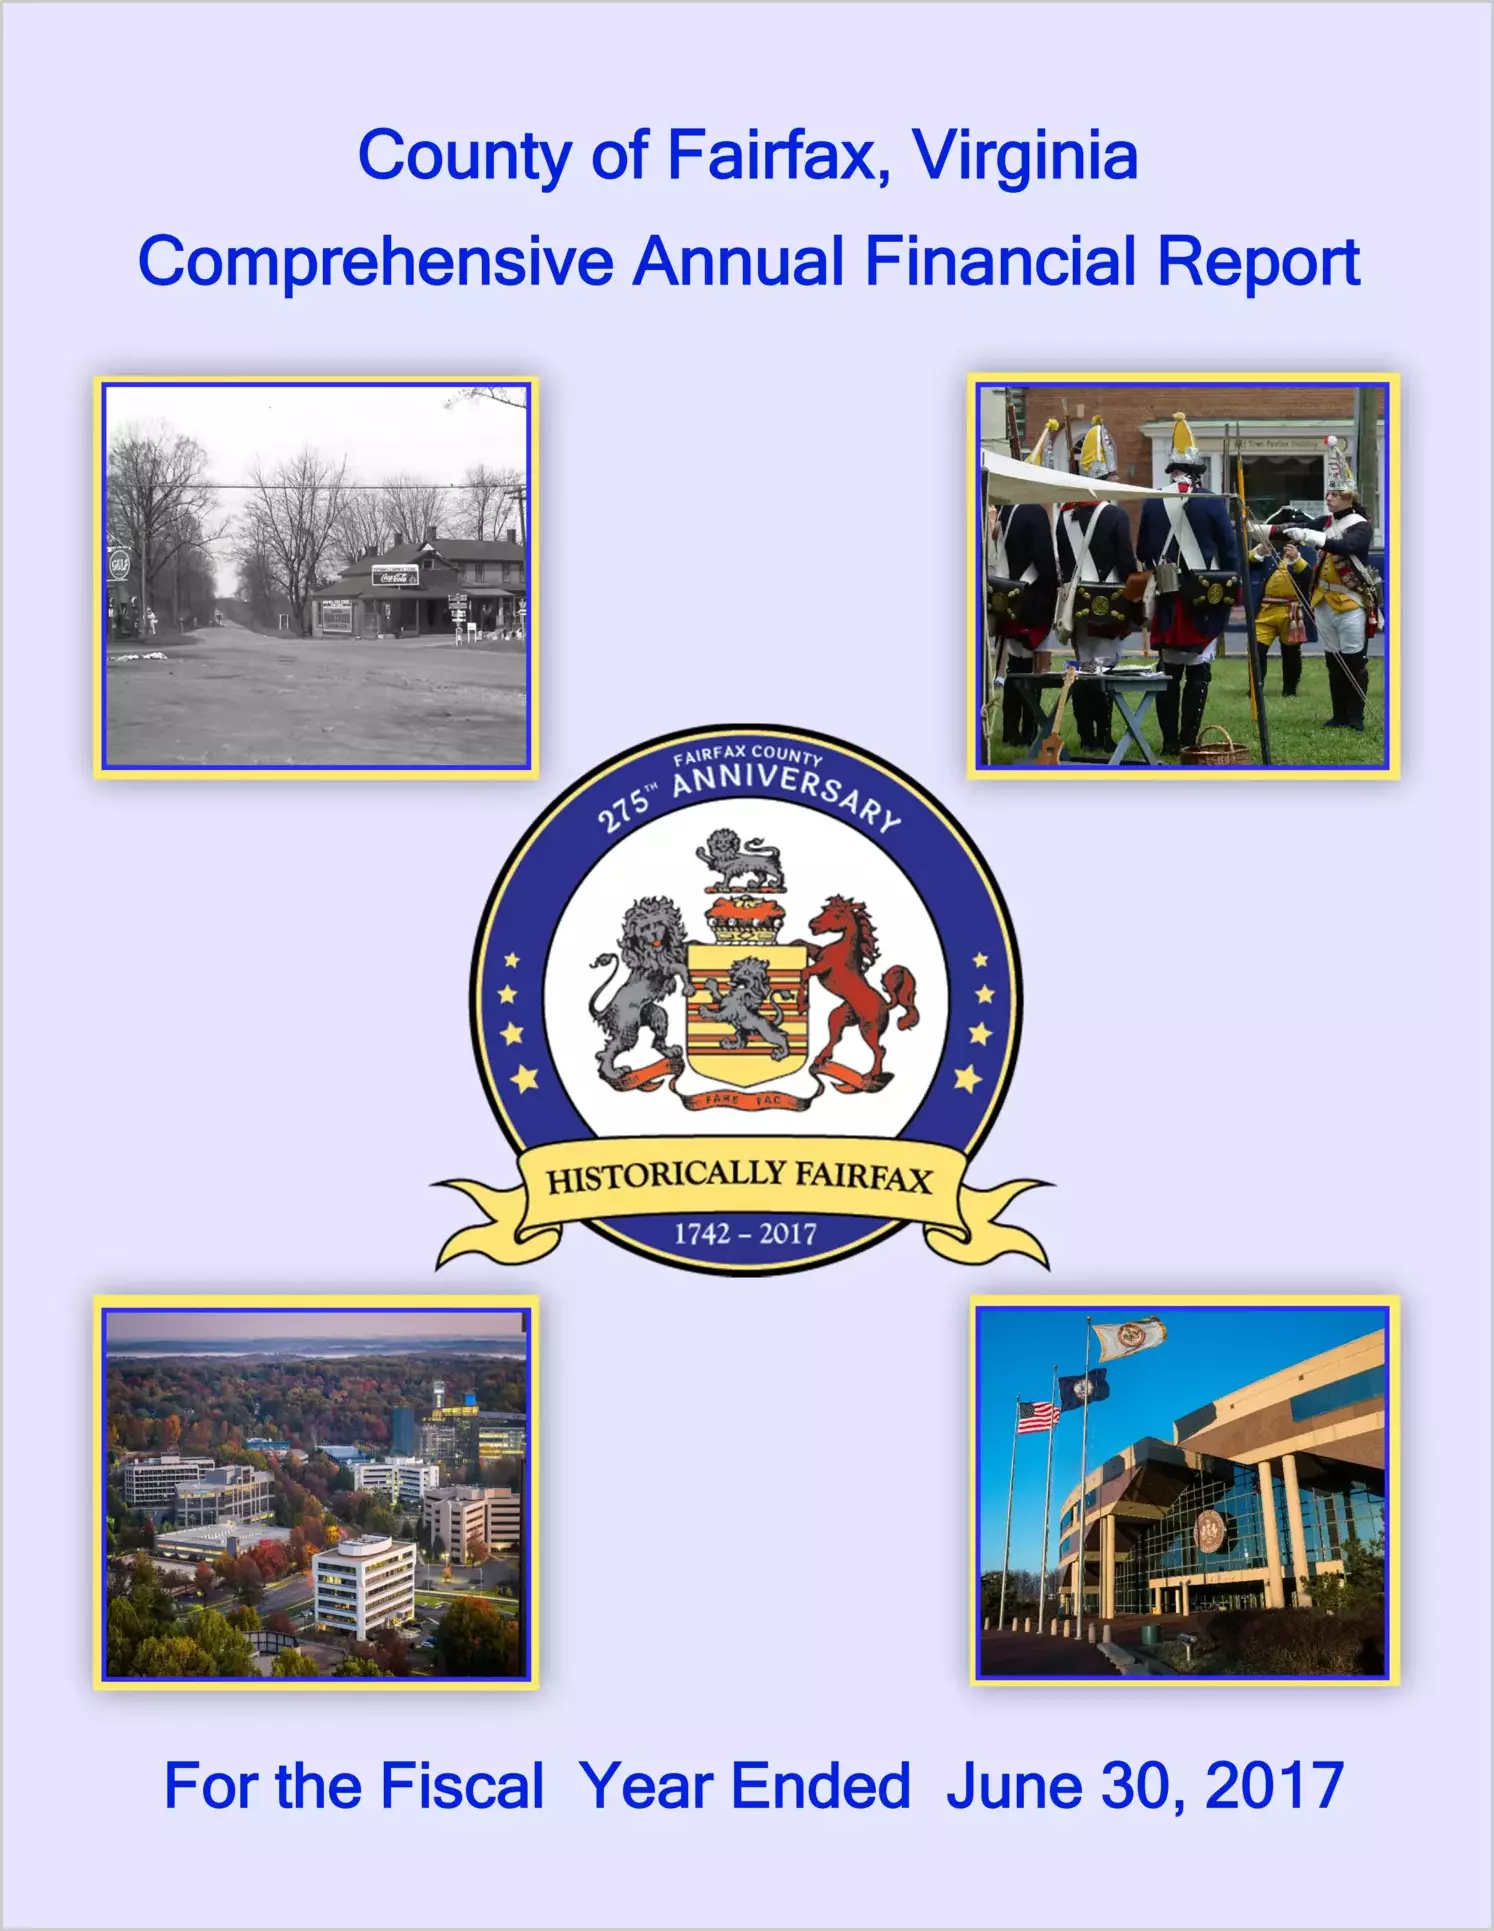 2017 Annual Financial Report for County of Fairfax